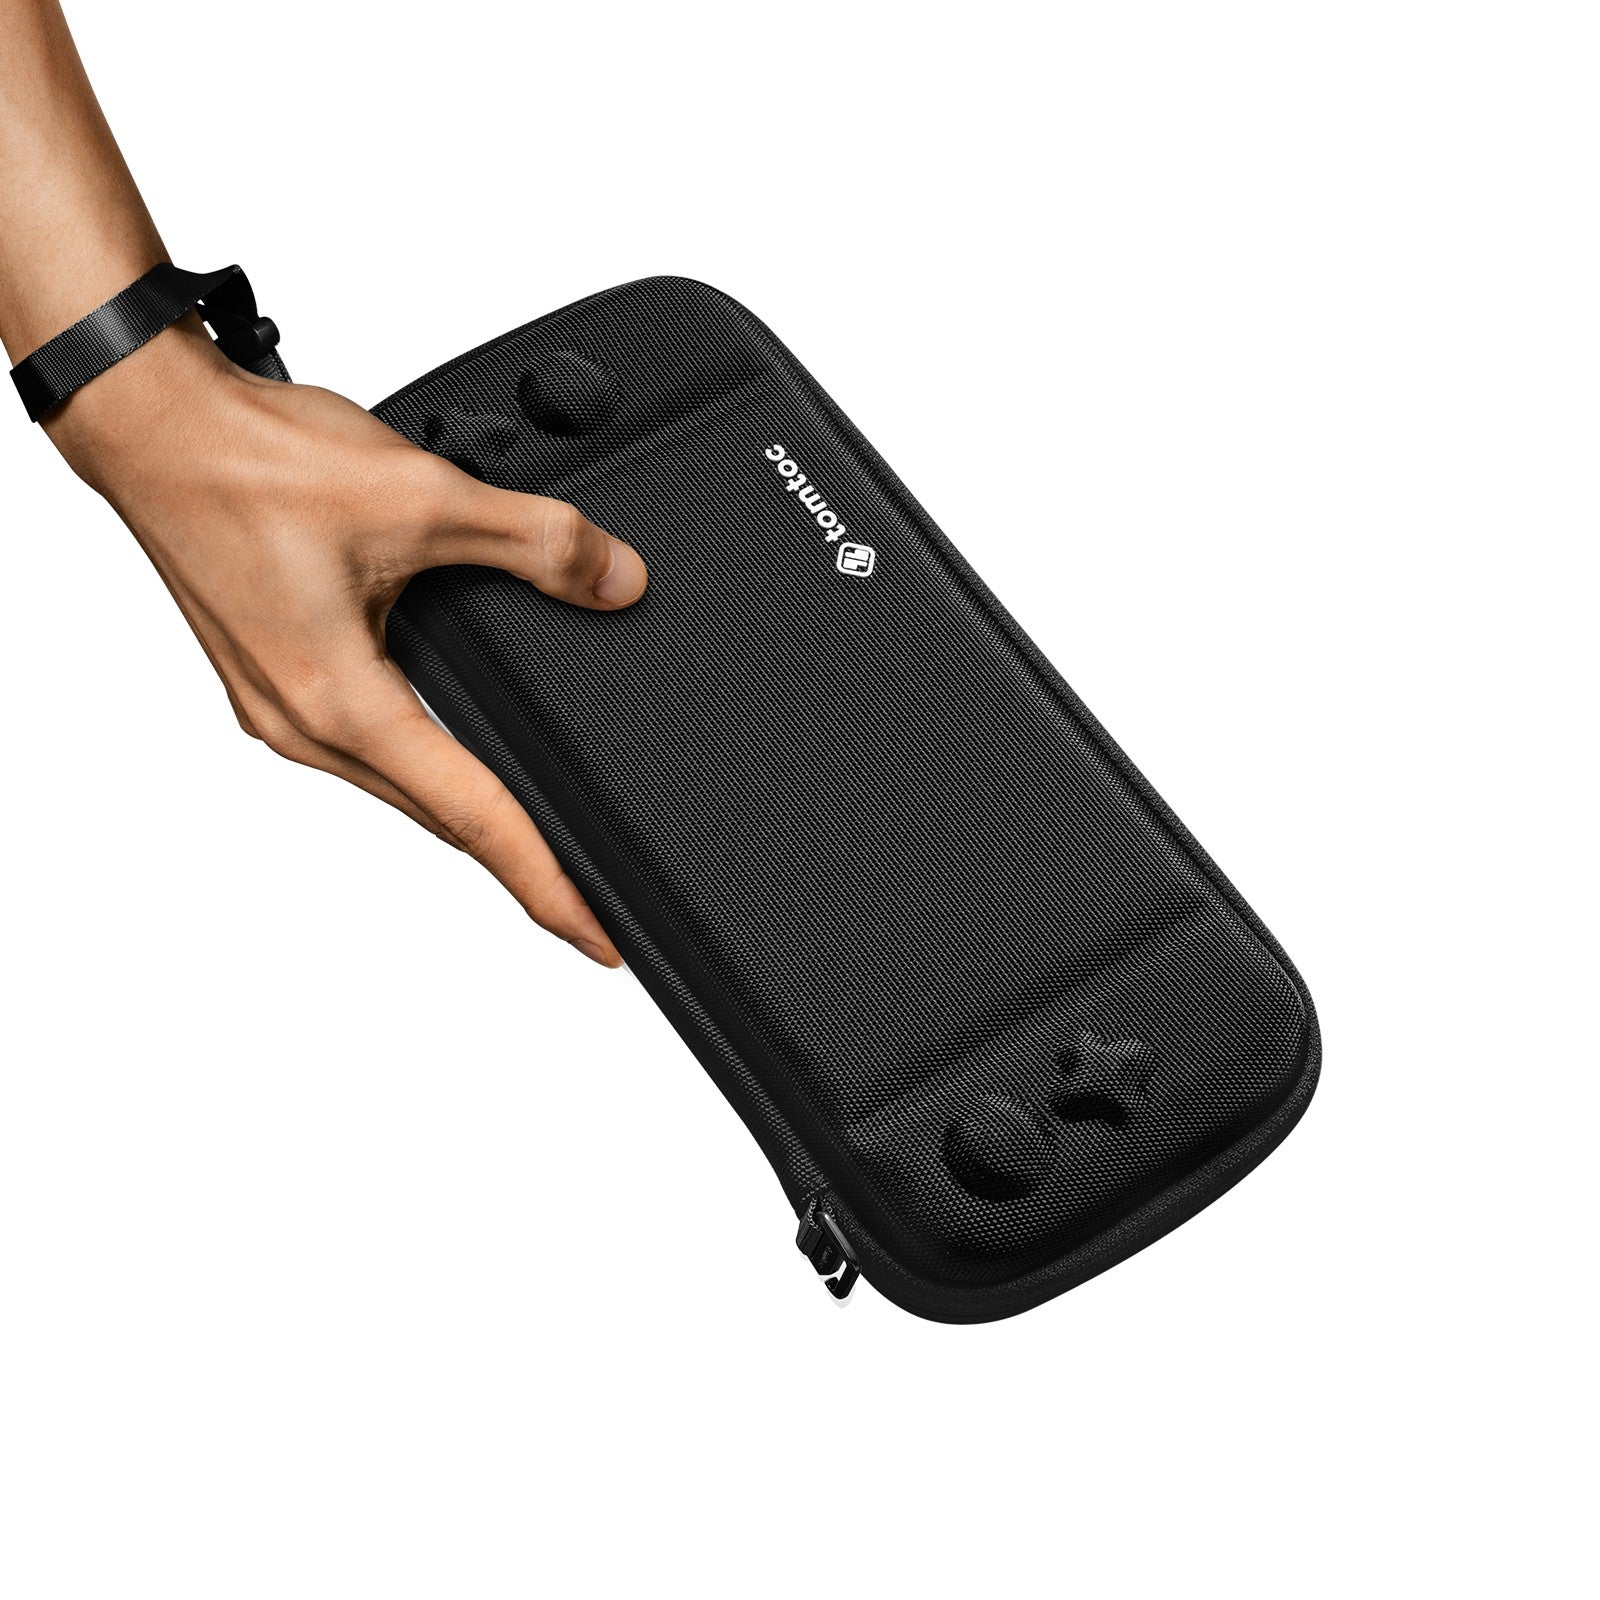 This Nintendo Switch OLED carry case is already my best-ever Black